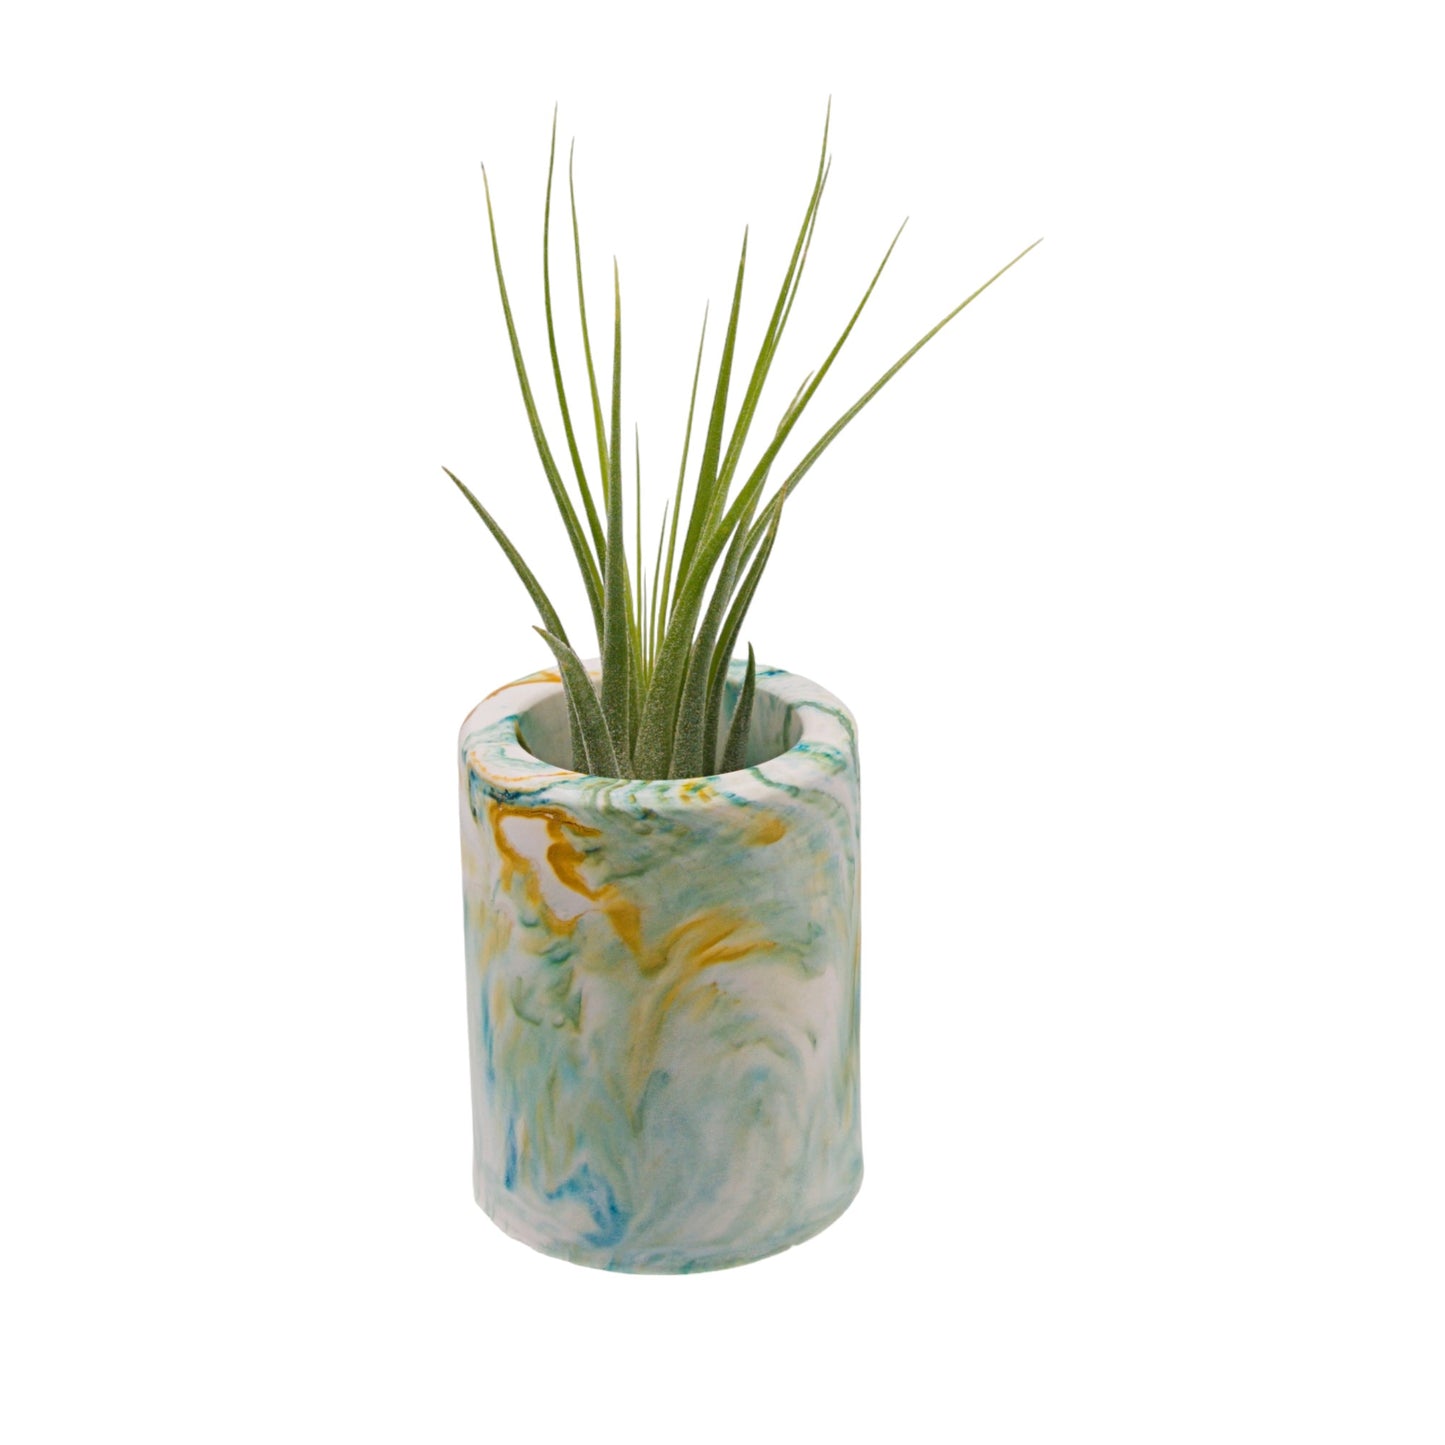 Monet-inspired marbled hydrostone airplant pots